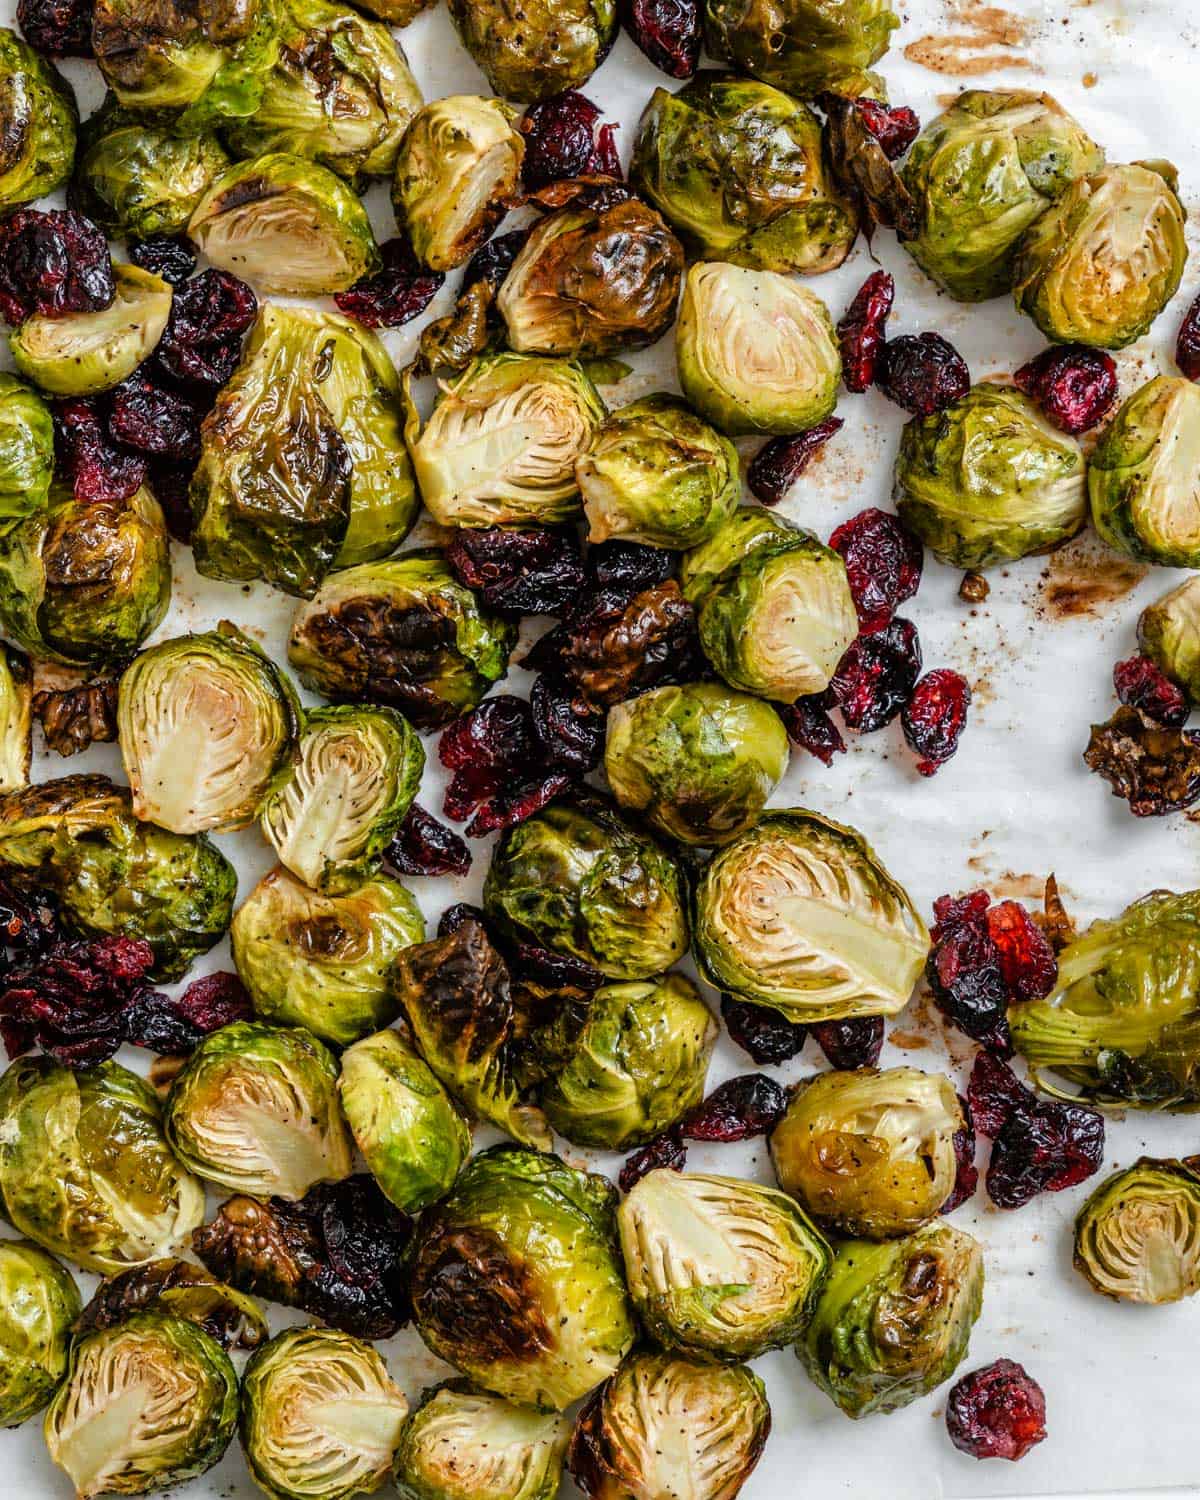 completed Roasted Brussels Sprouts with Cranberries on a white dish